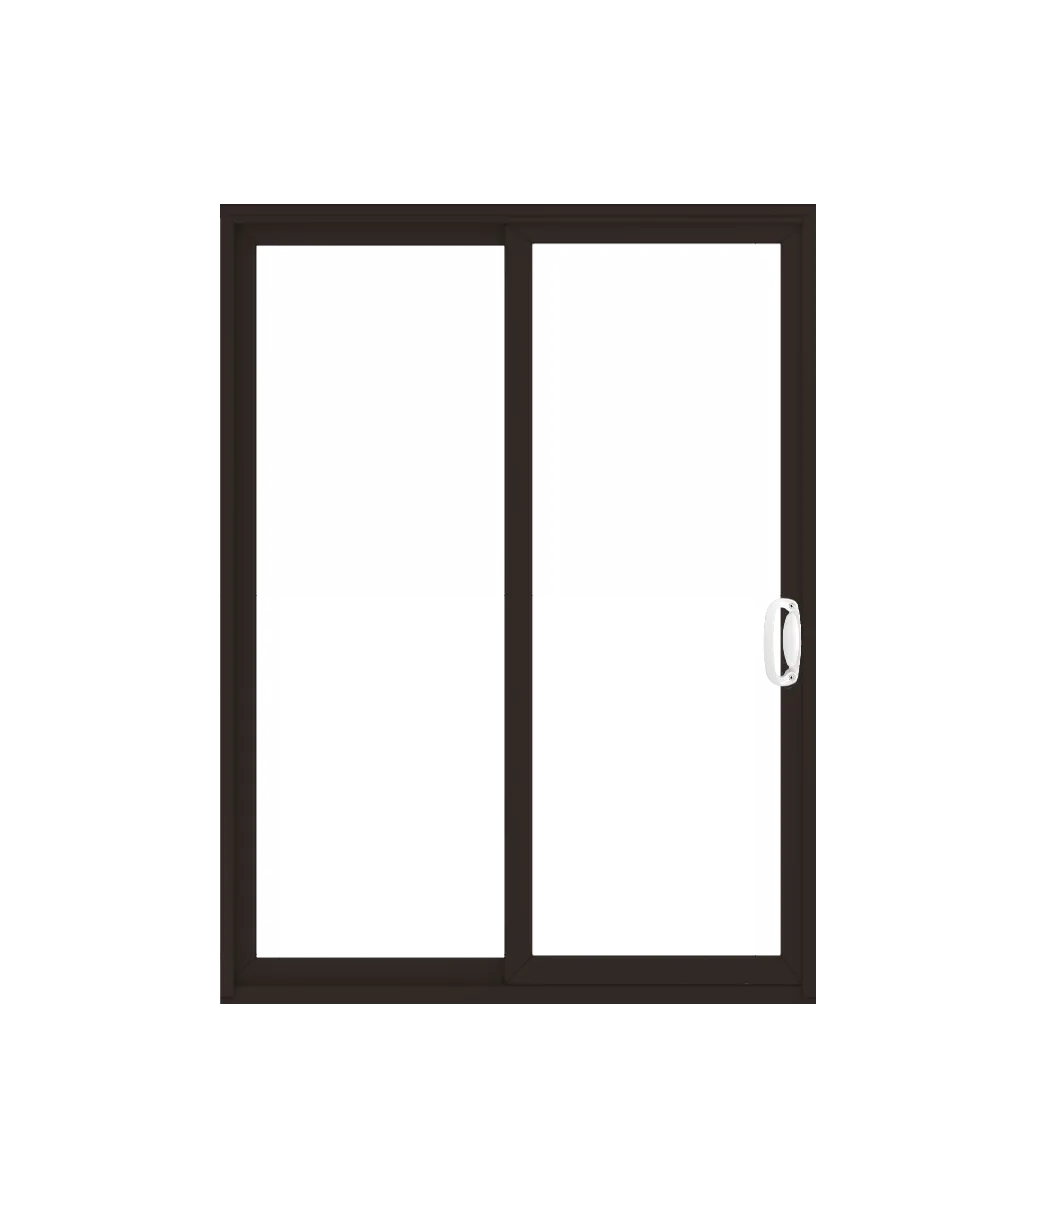 ANDERSEN PS6 200 Series Permashield 72" X 82-3/8" Sliding/Gliding Dual Pane Or Triple Pane Low-E Tempered Argon Fill Stainless Glass 2 Panel Patio Door Grilles/Screen Options